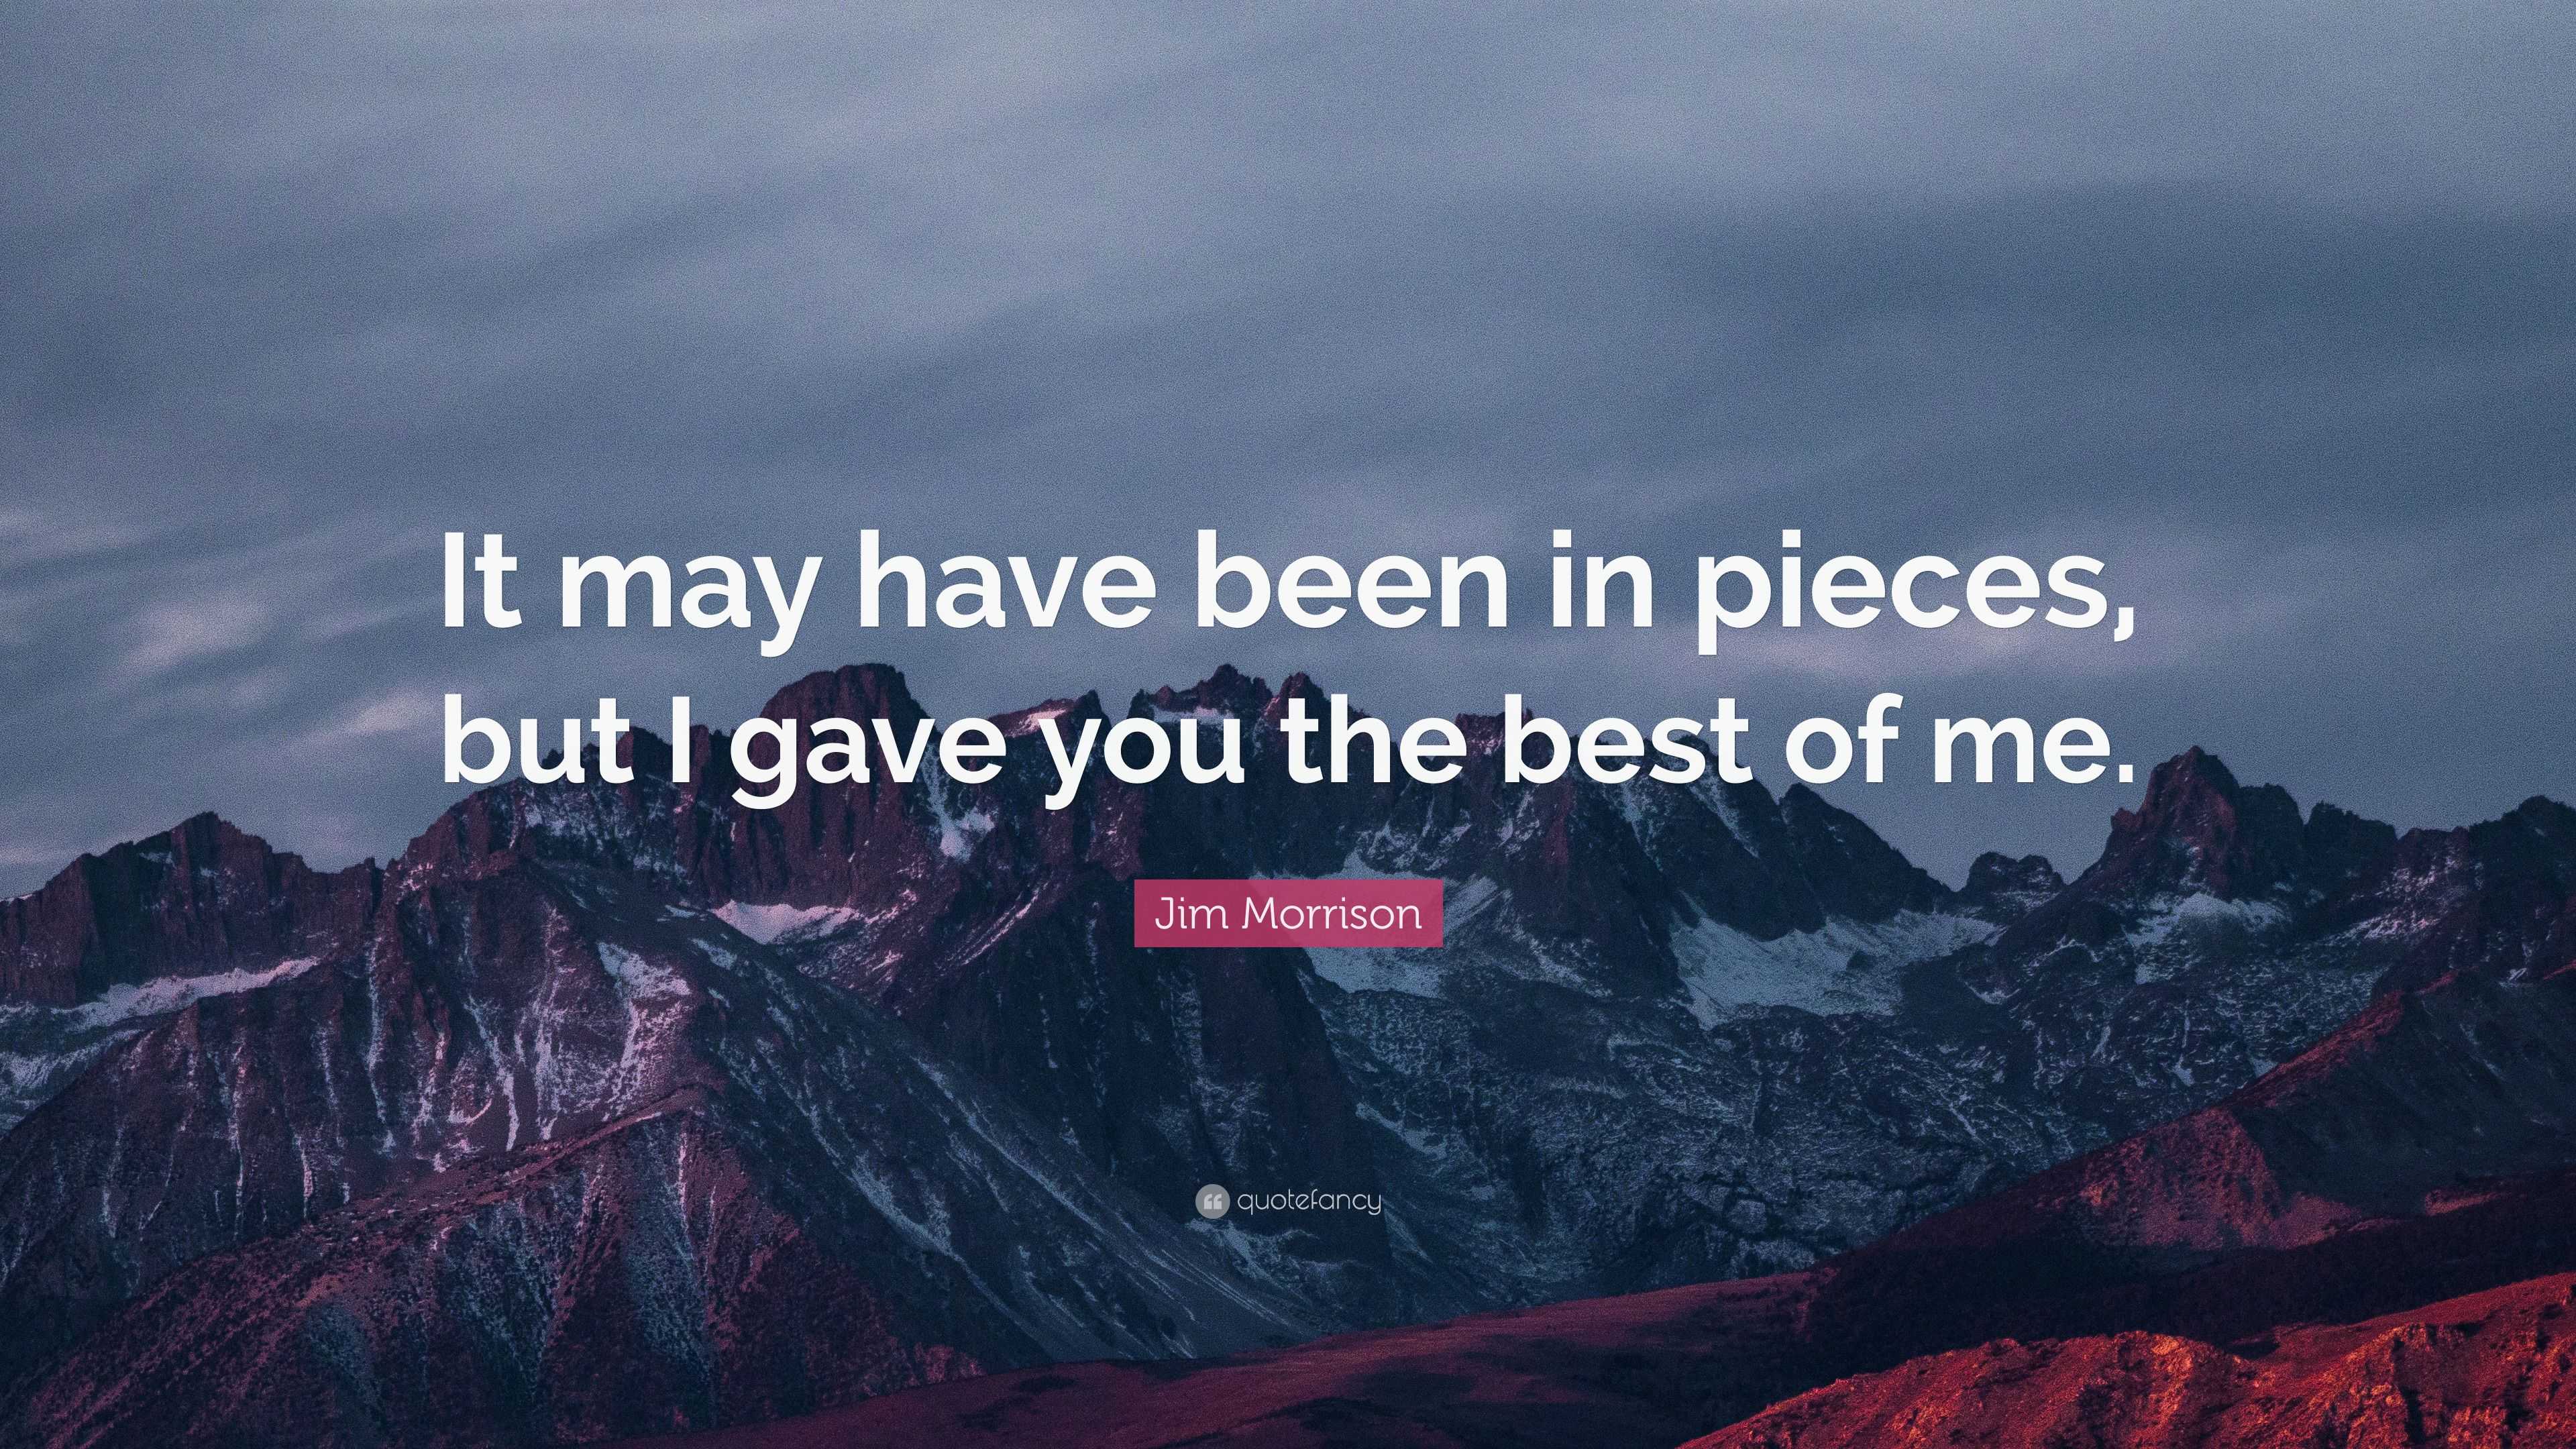 Jim Morrison Quote: “It may have been in pieces, but I gave you the ...